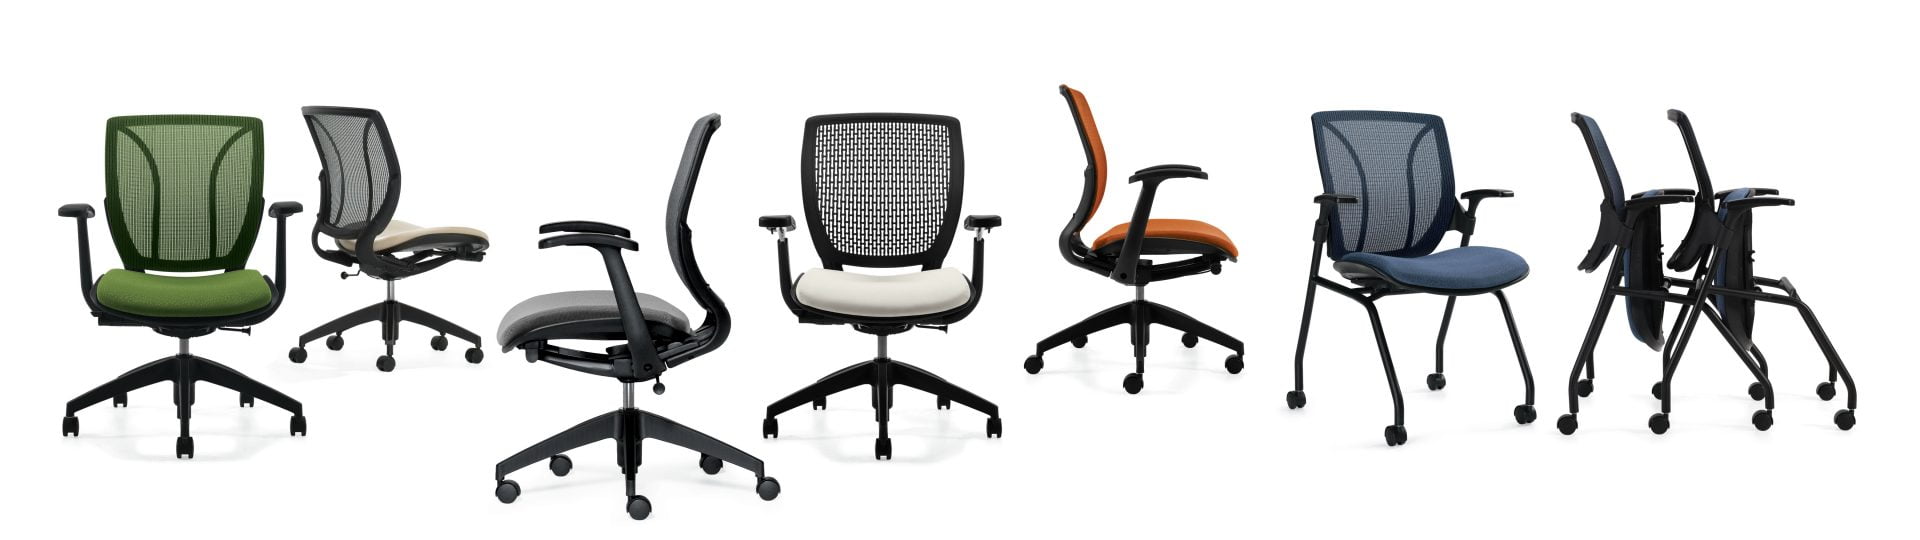 global desk chairs and seating